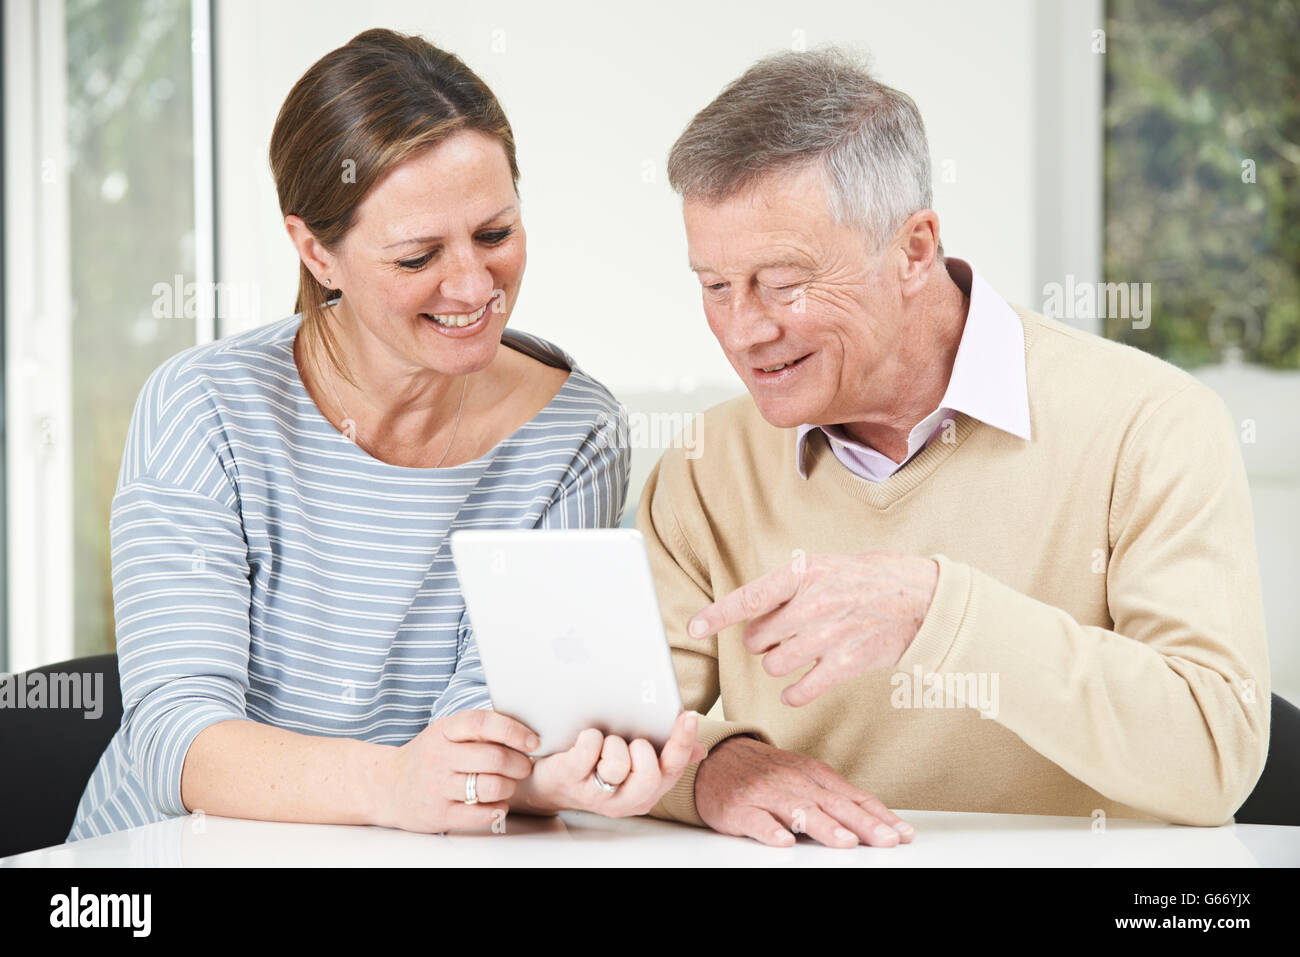 Senior Man And Adult Daughter Looking At Digital Tablet Together Stock Photo